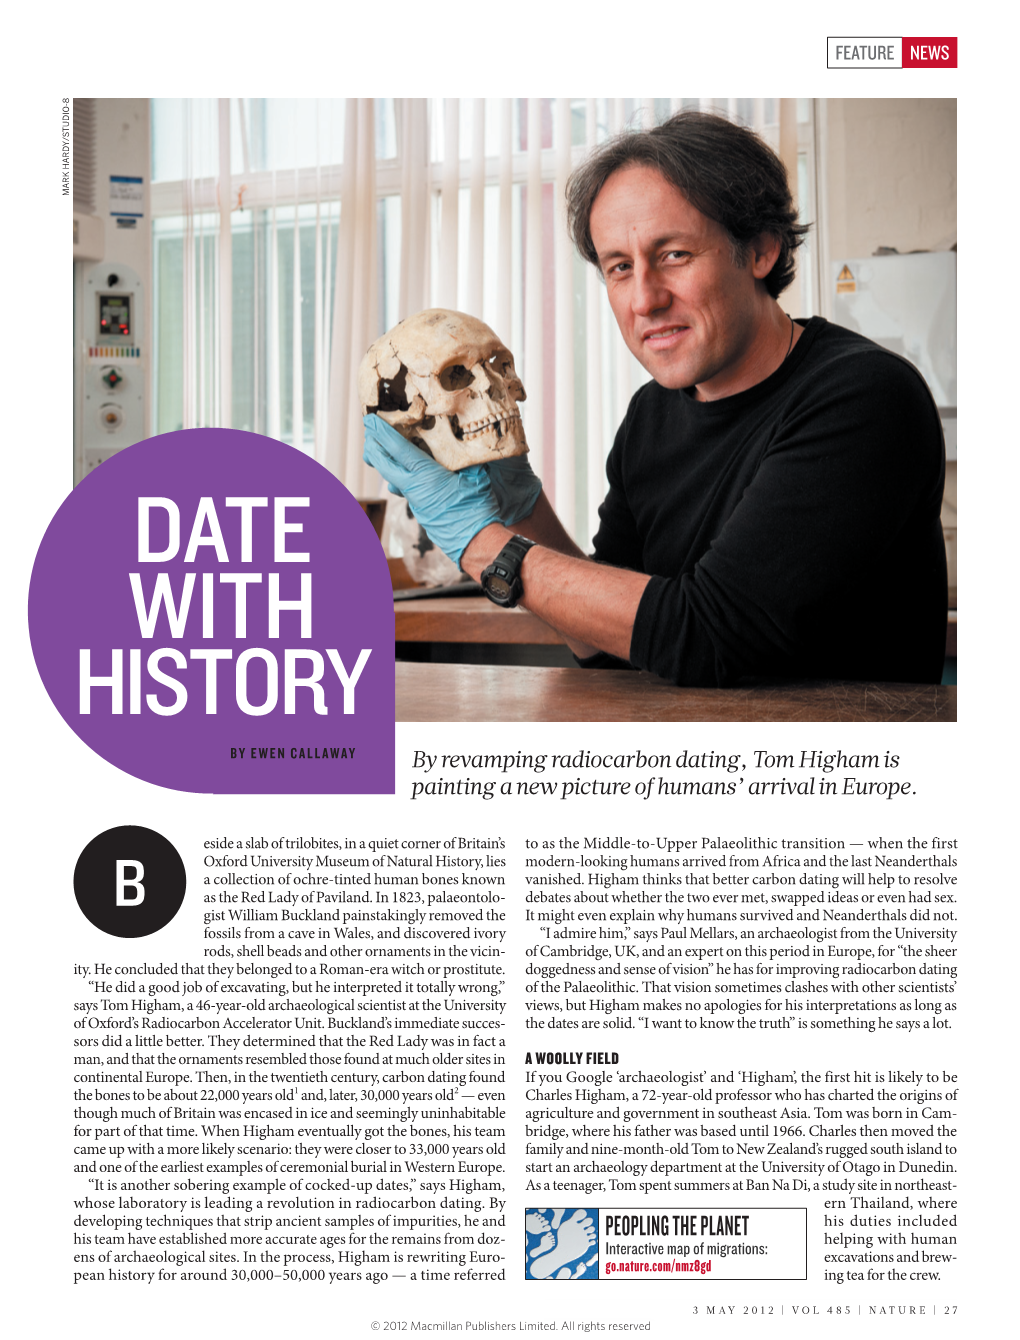 DATE with HISTORY by EWEN CALLAWAY by Revamping Radiocarbon Dating, Tom Higham Is Painting a New Picture of Humans’ Arrival in Europe